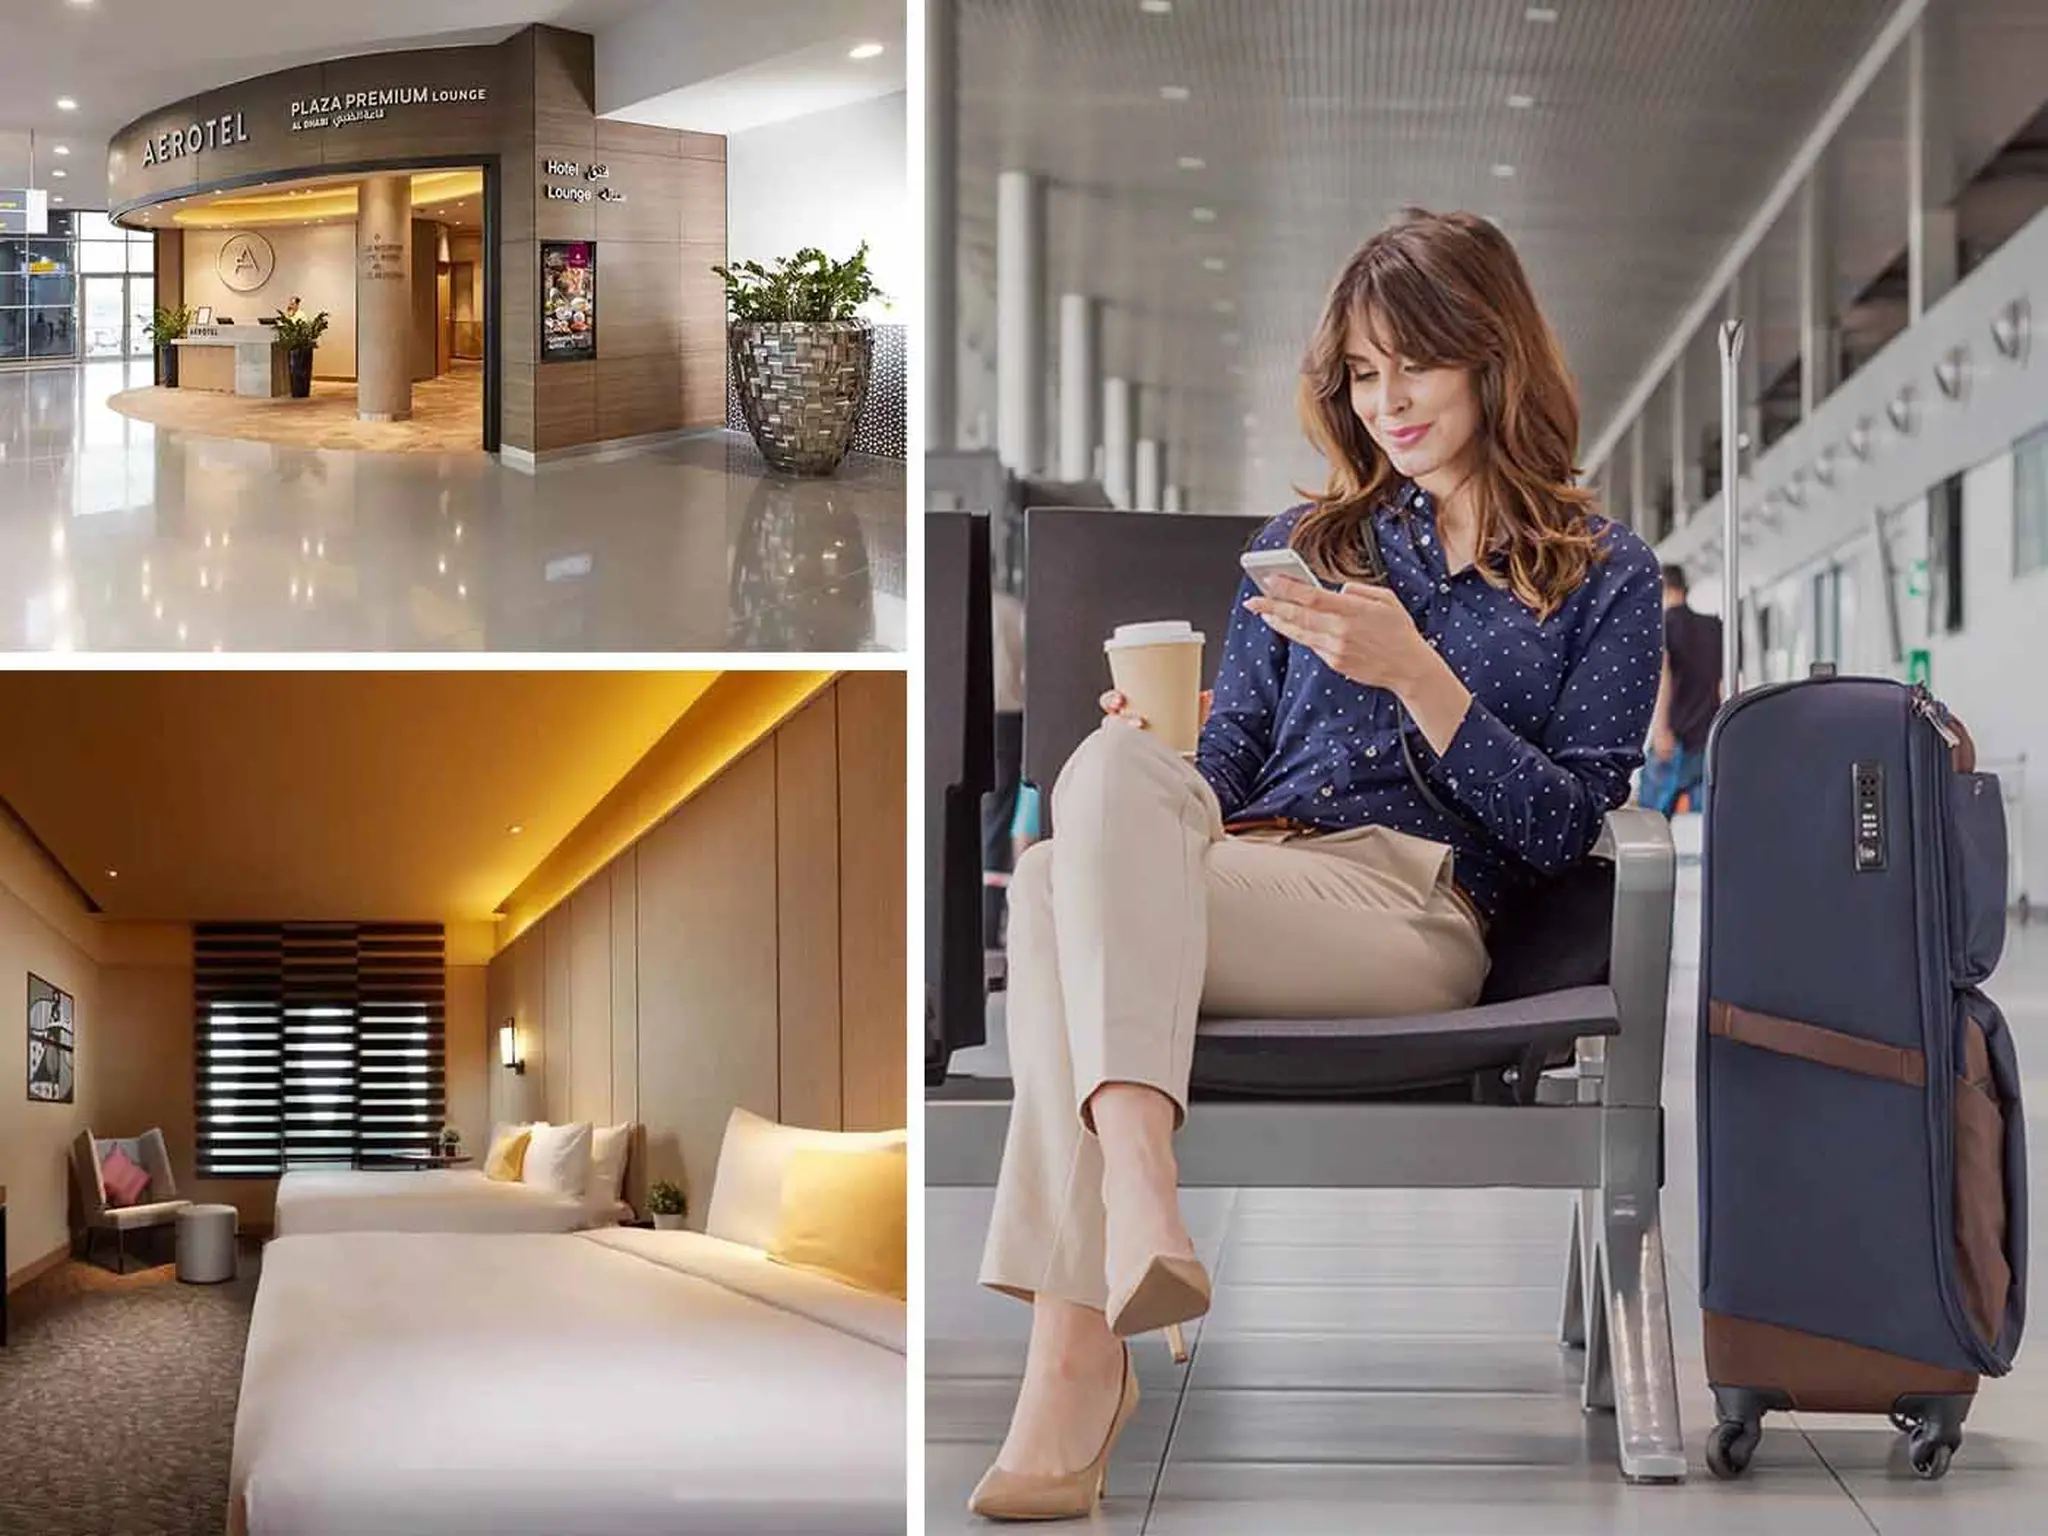 Emirates Airlines provides free hotel accommodation for 2 days for travelers and residents